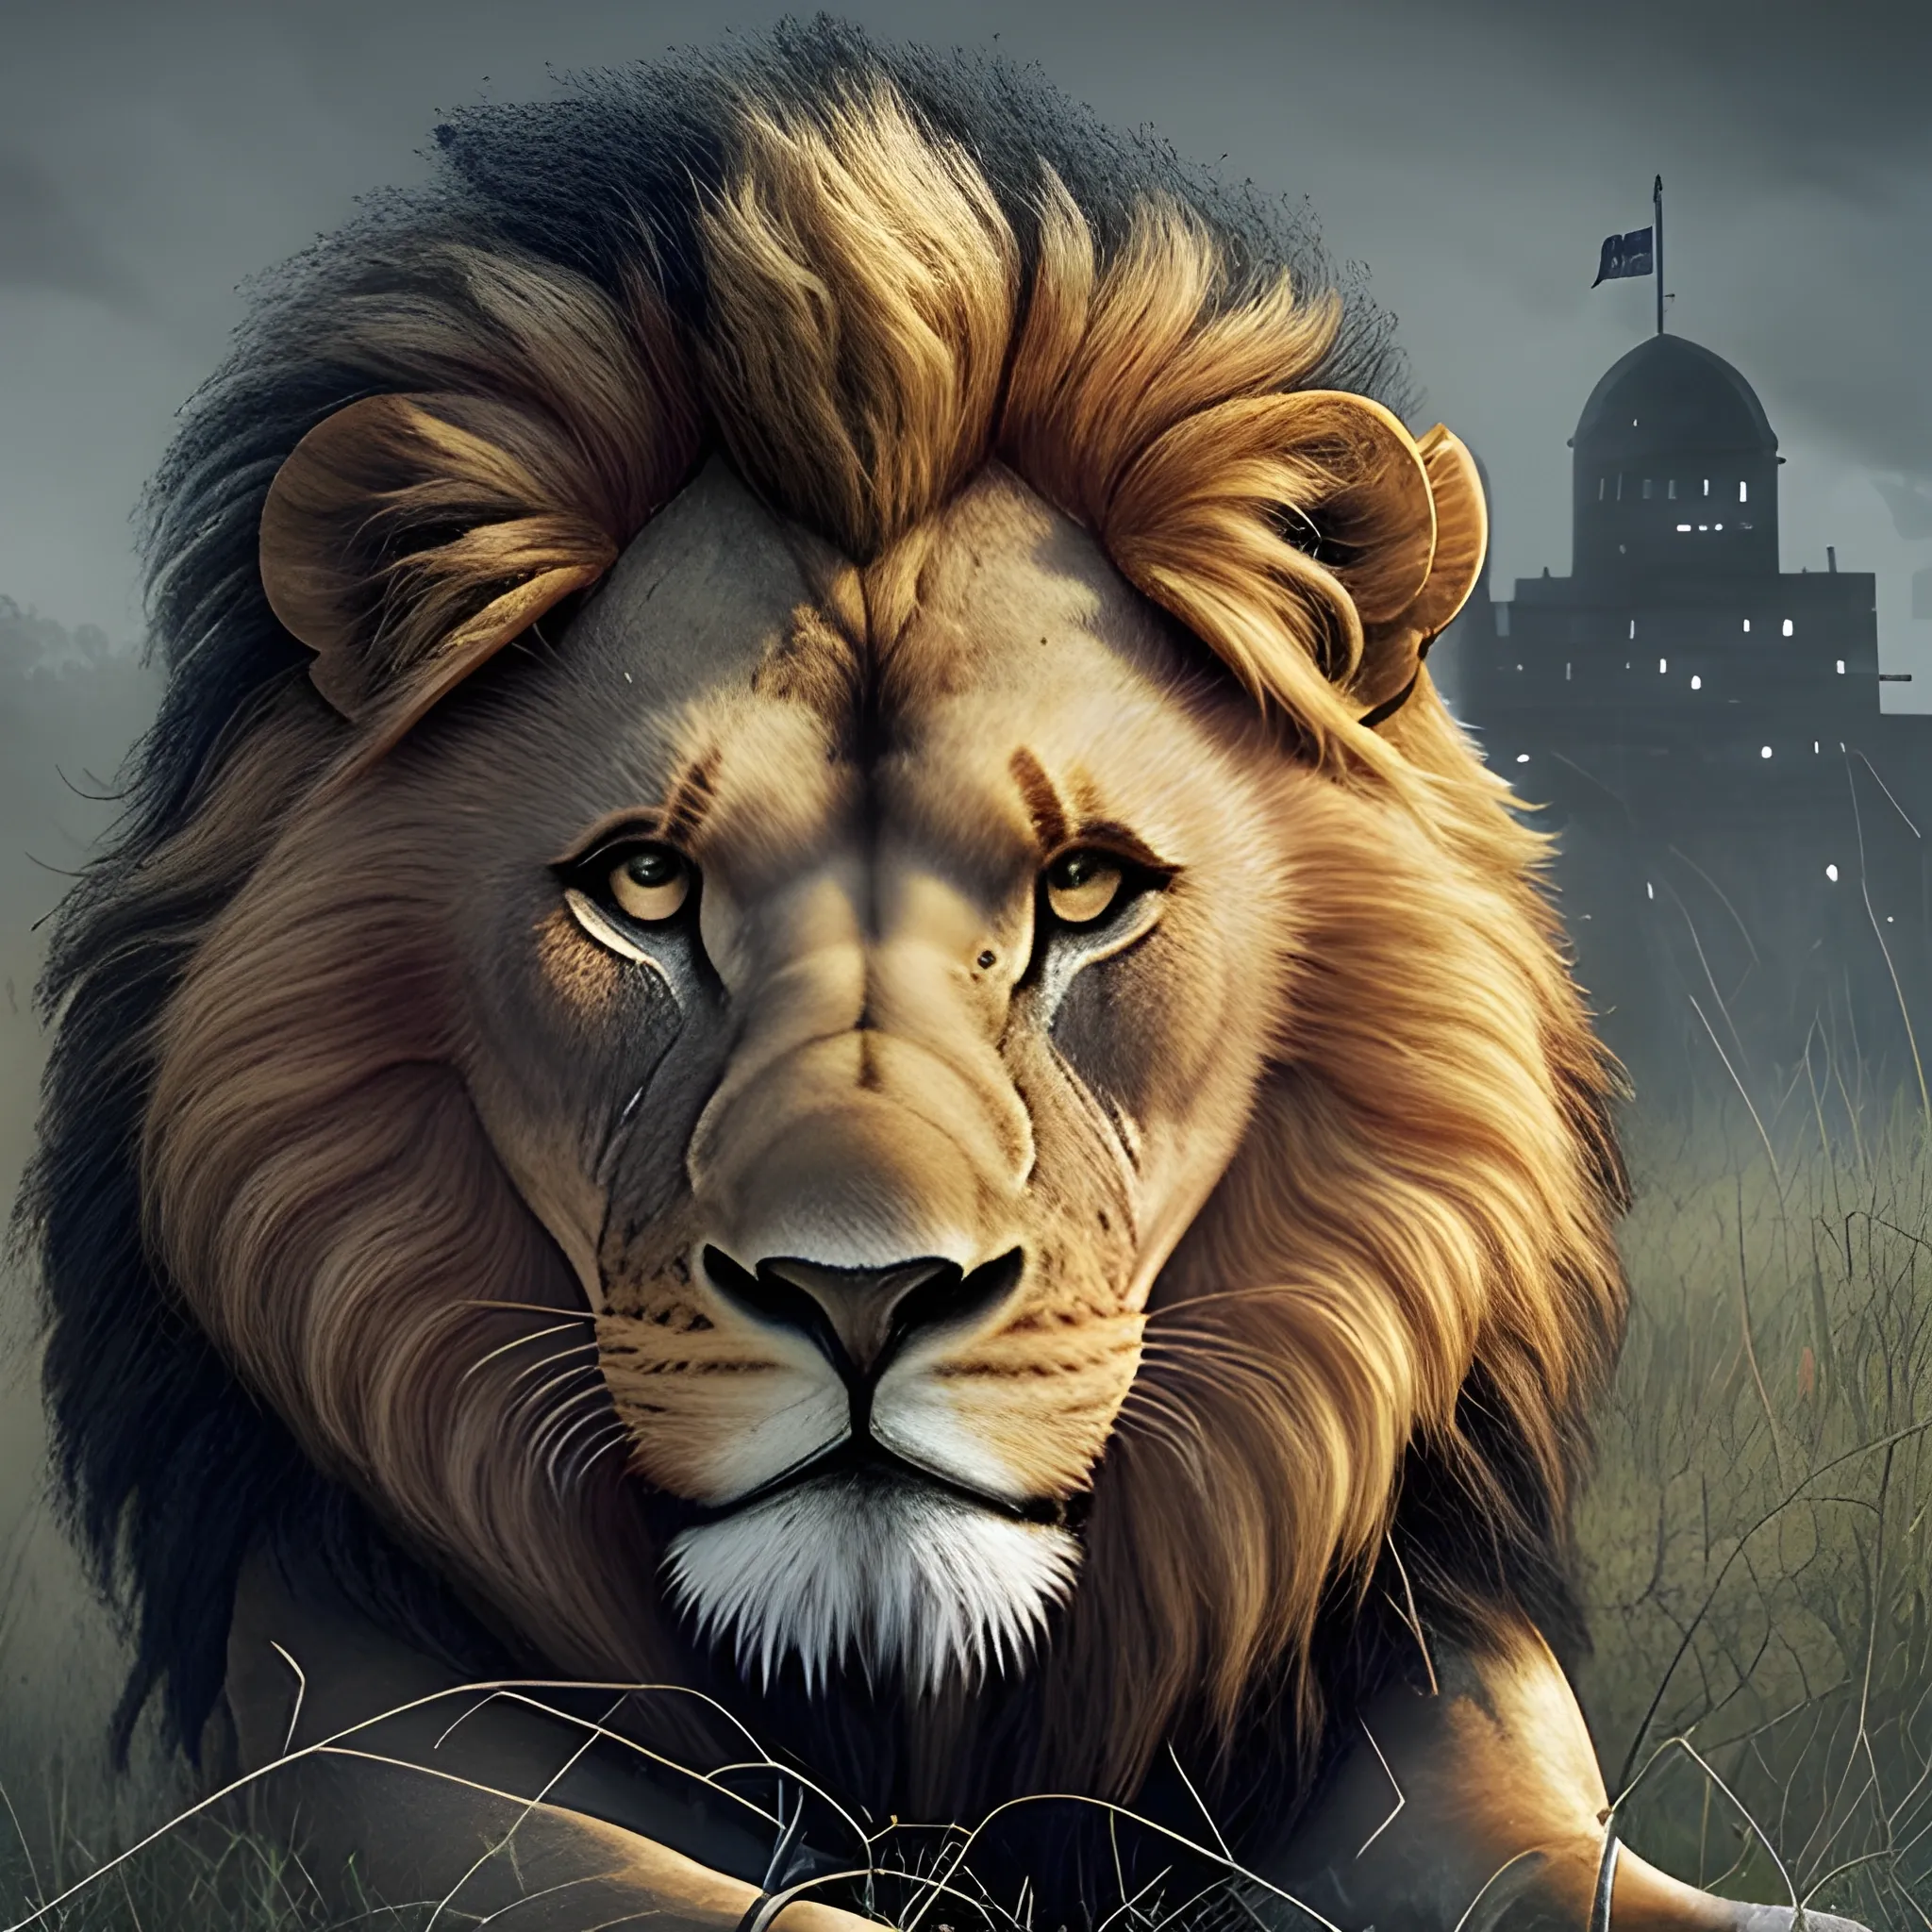 Strong lion, wordwar, army, dangerous, abandoned place